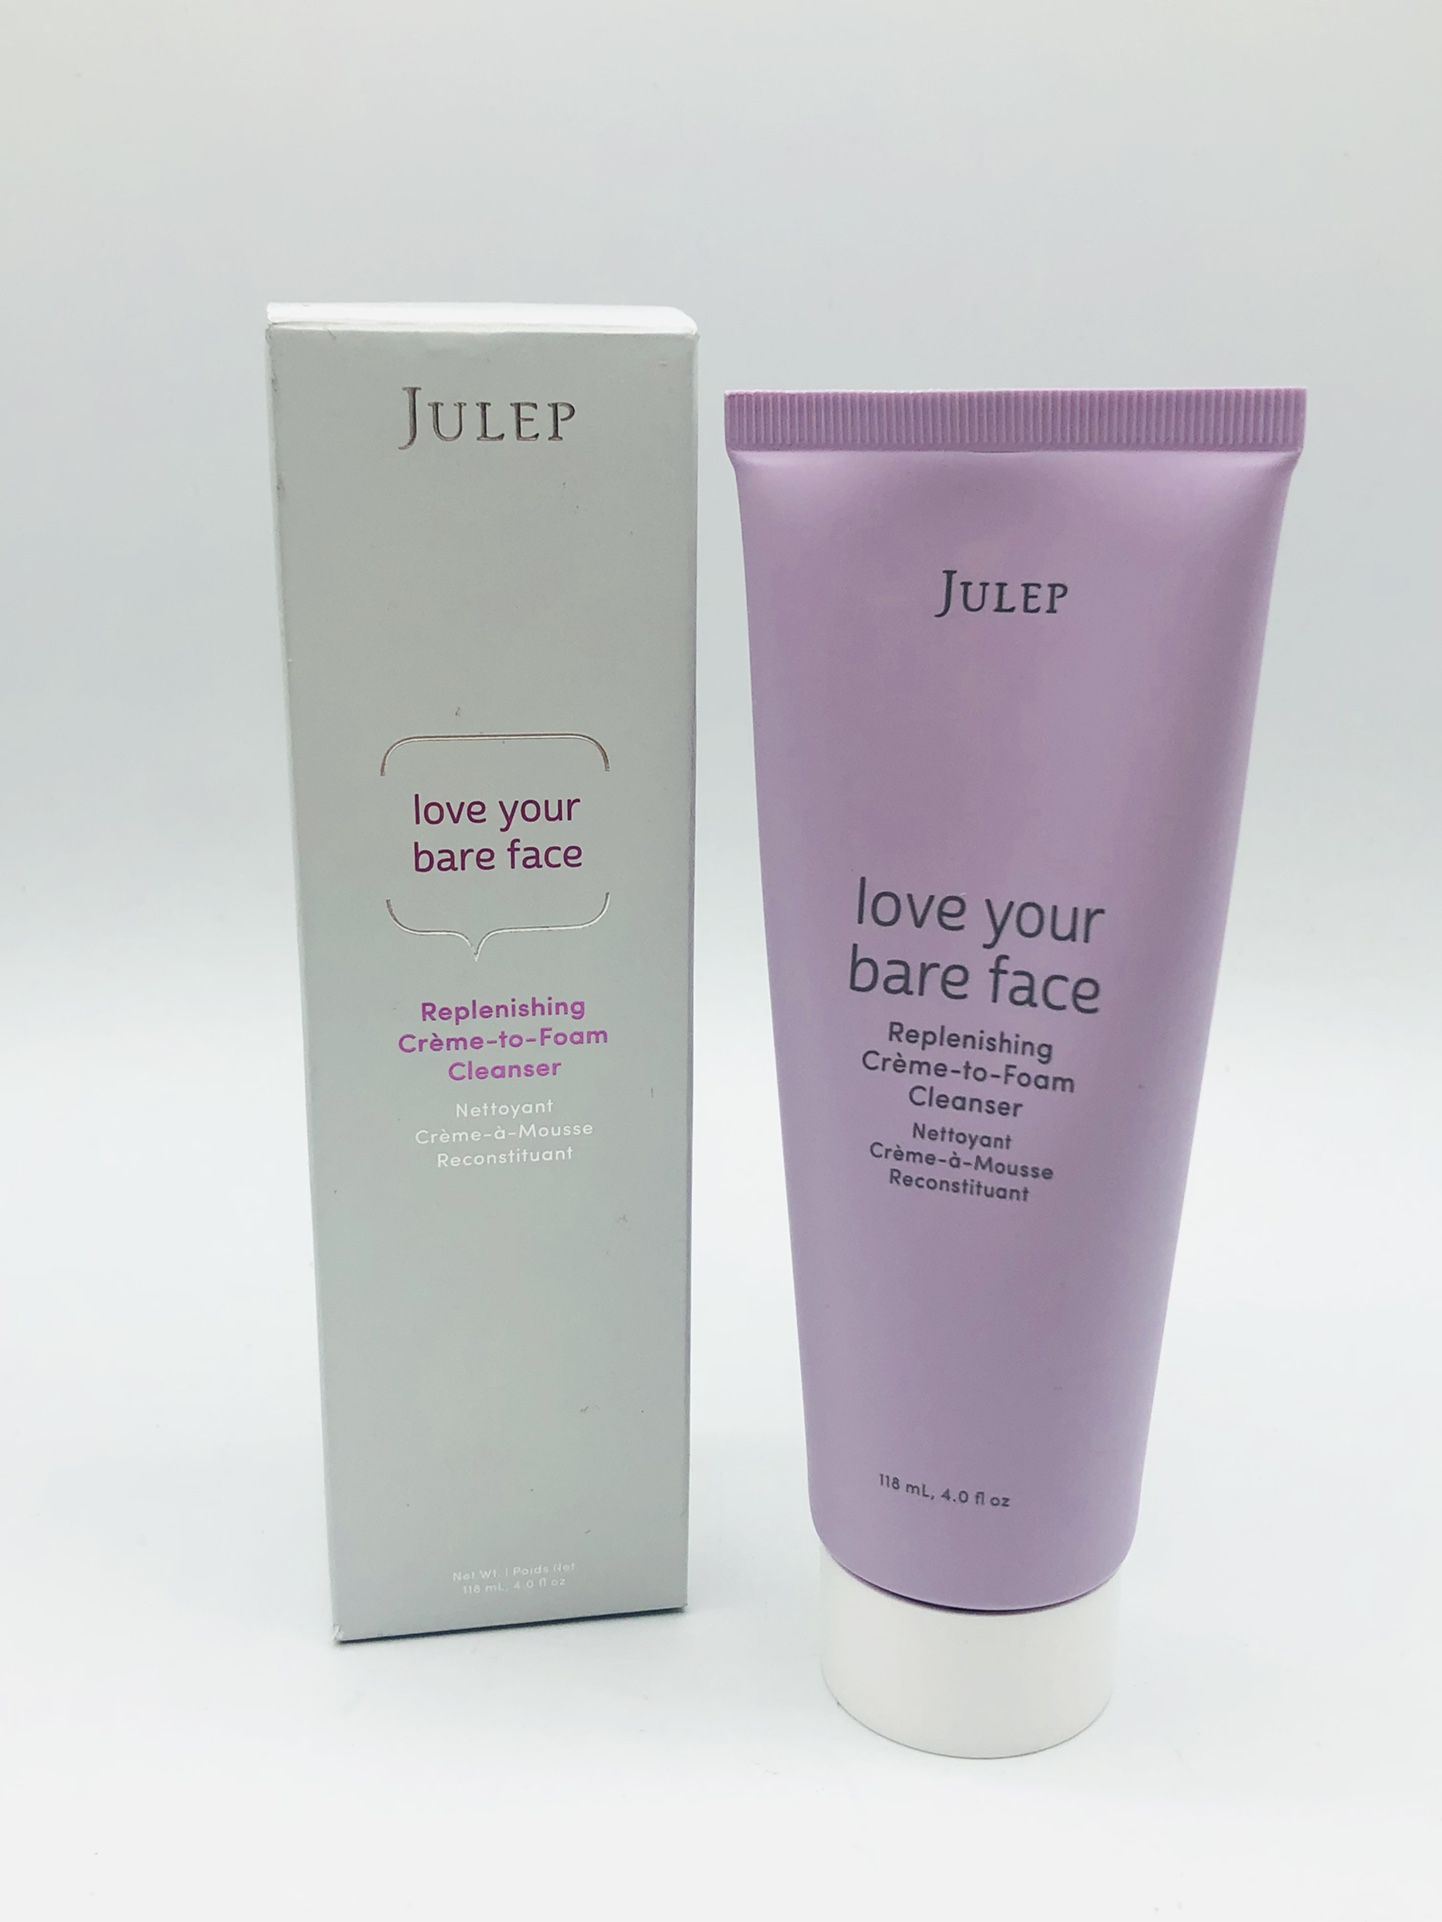 Julep Love Your Bare Face Replenishing Creme to Foam Cleanser 4.0 fl oz. NEW